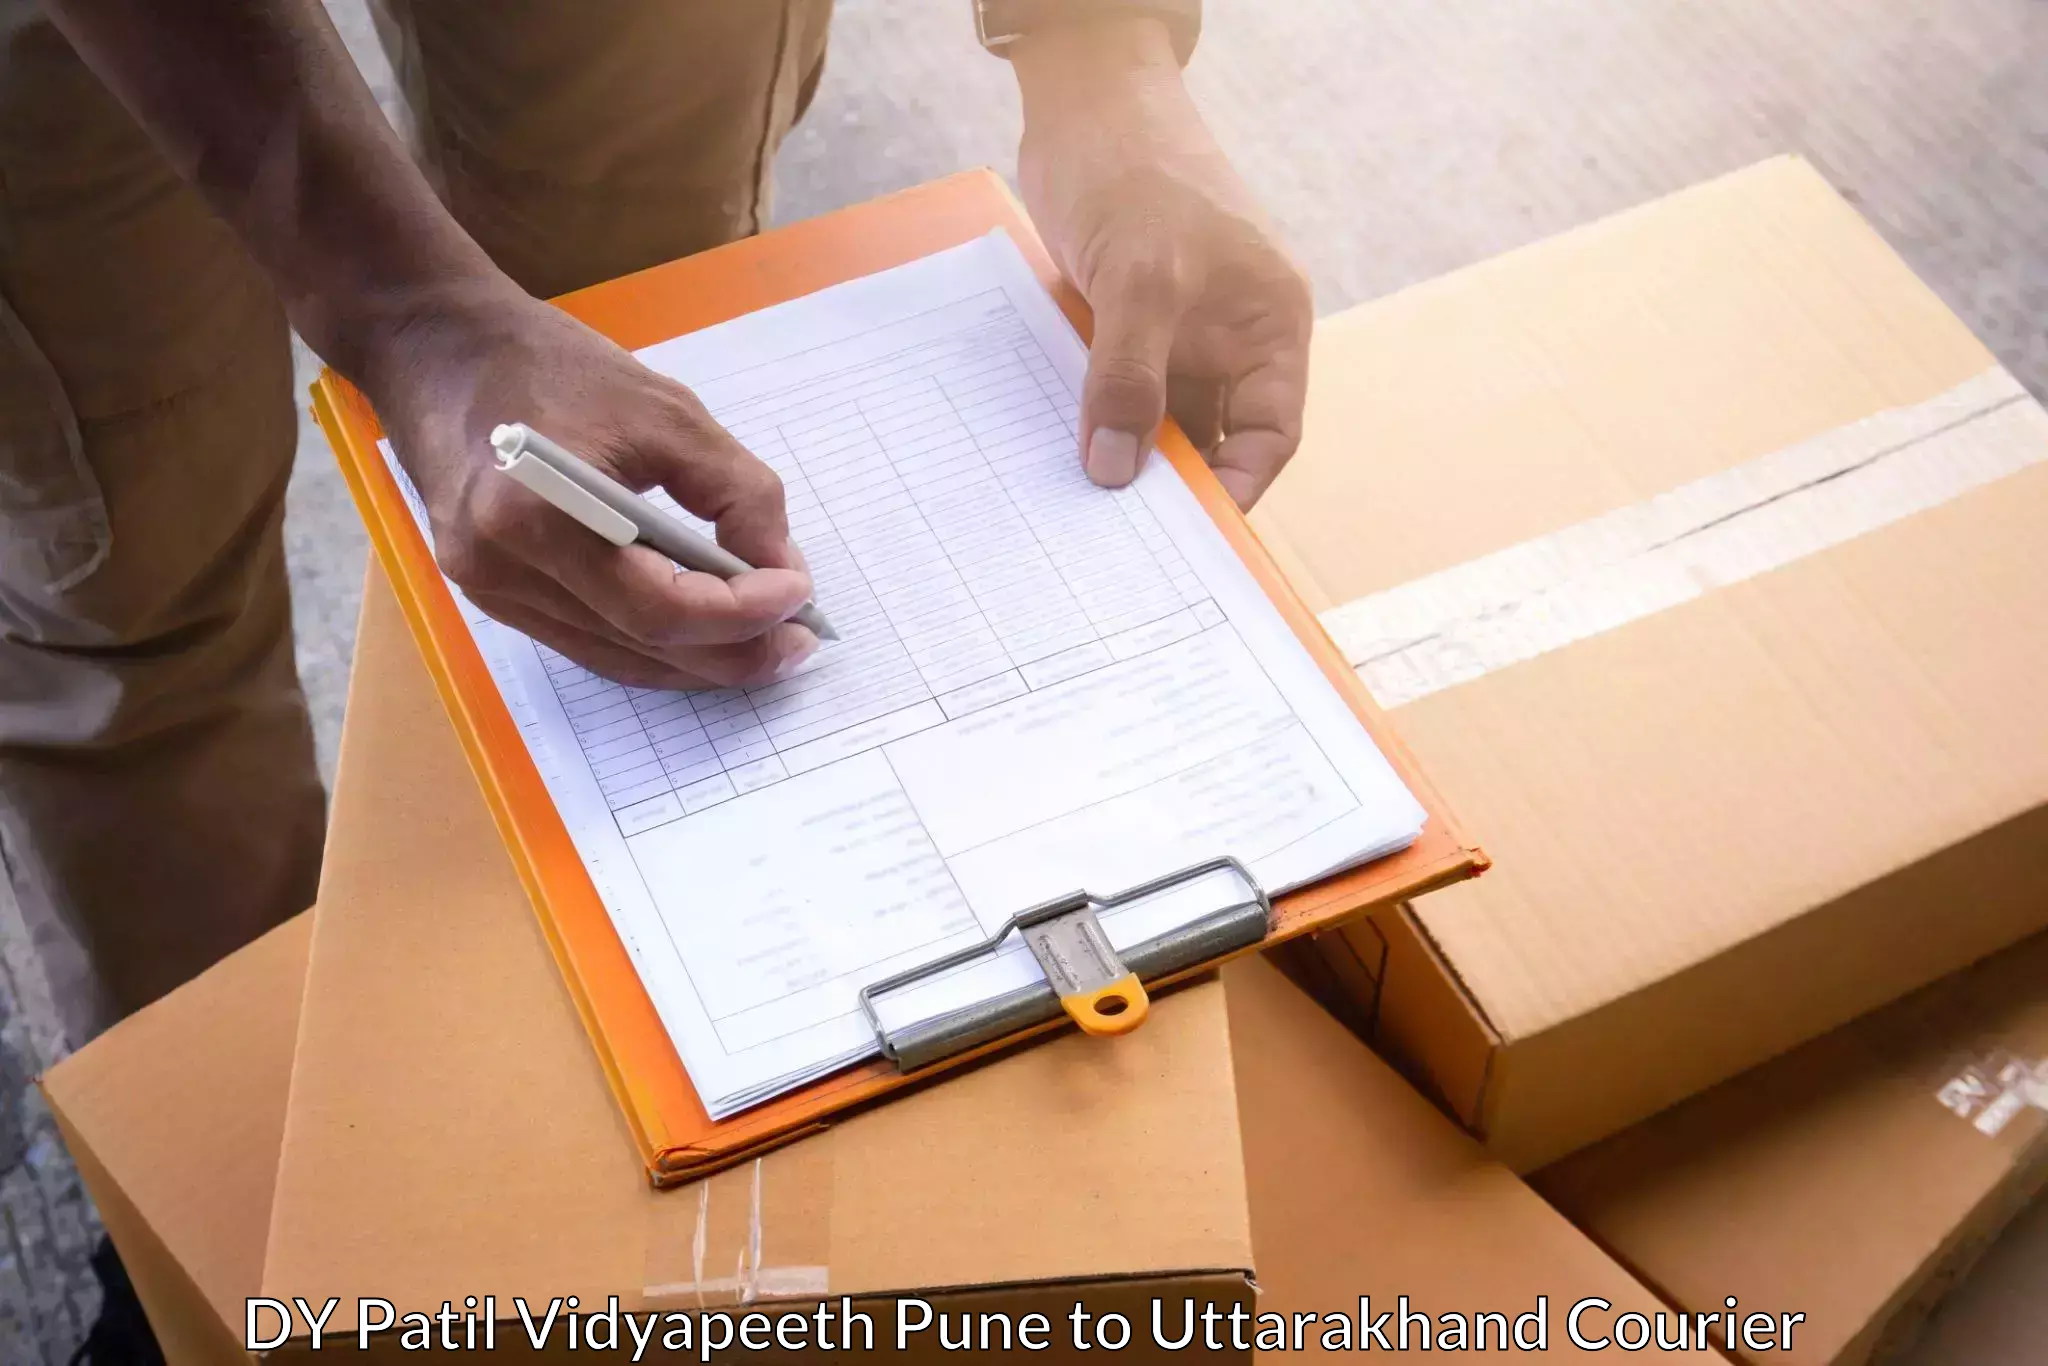 Secure freight services DY Patil Vidyapeeth Pune to Bhagwanpur